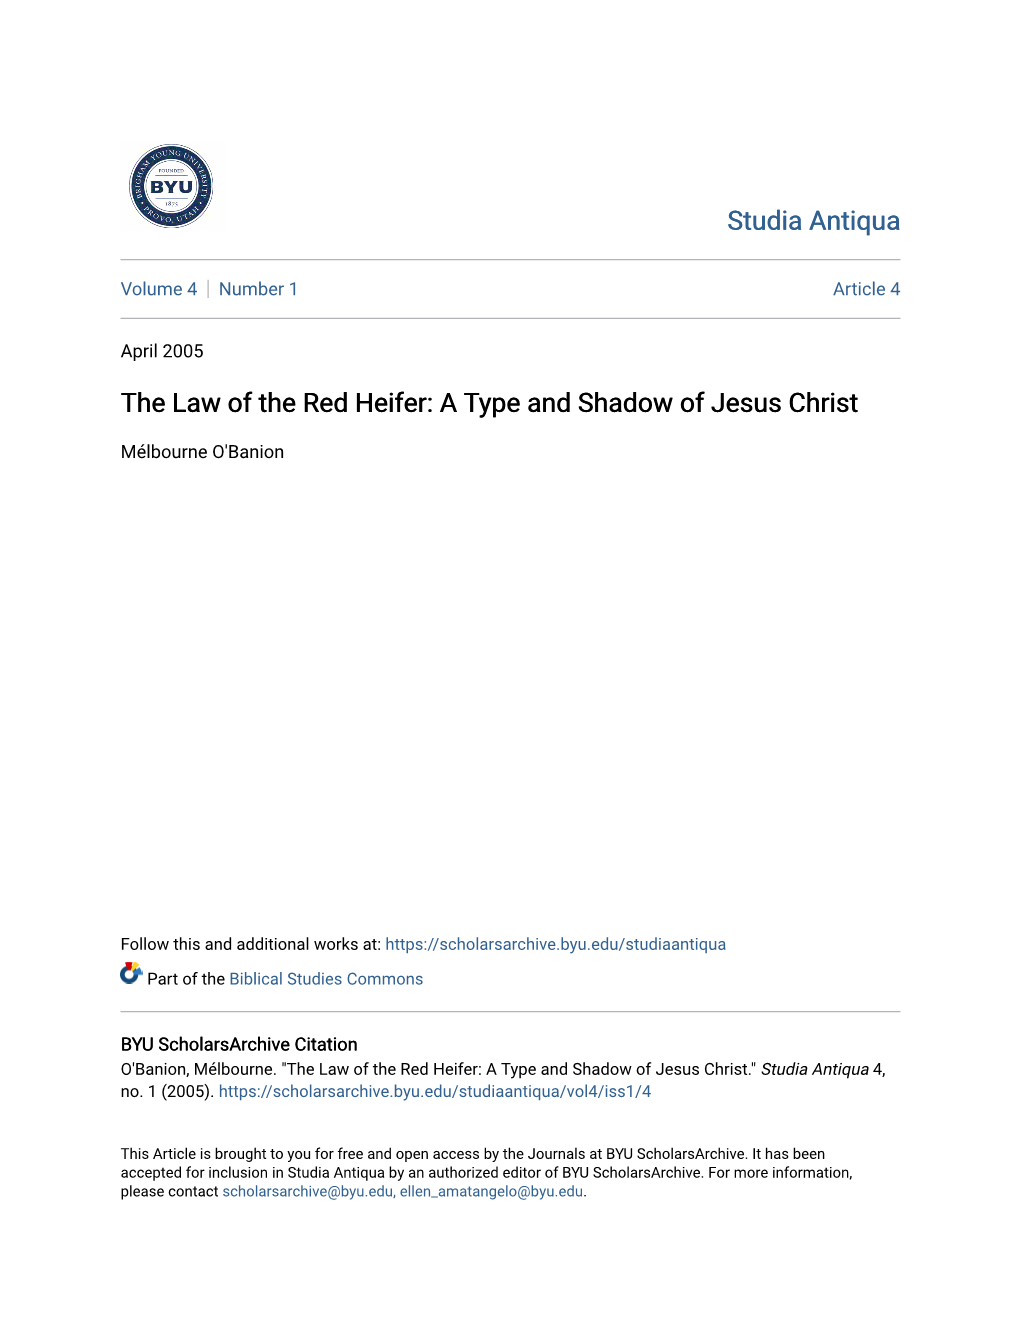 The Law of the Red Heifer: a Type and Shadow of Jesus Christ